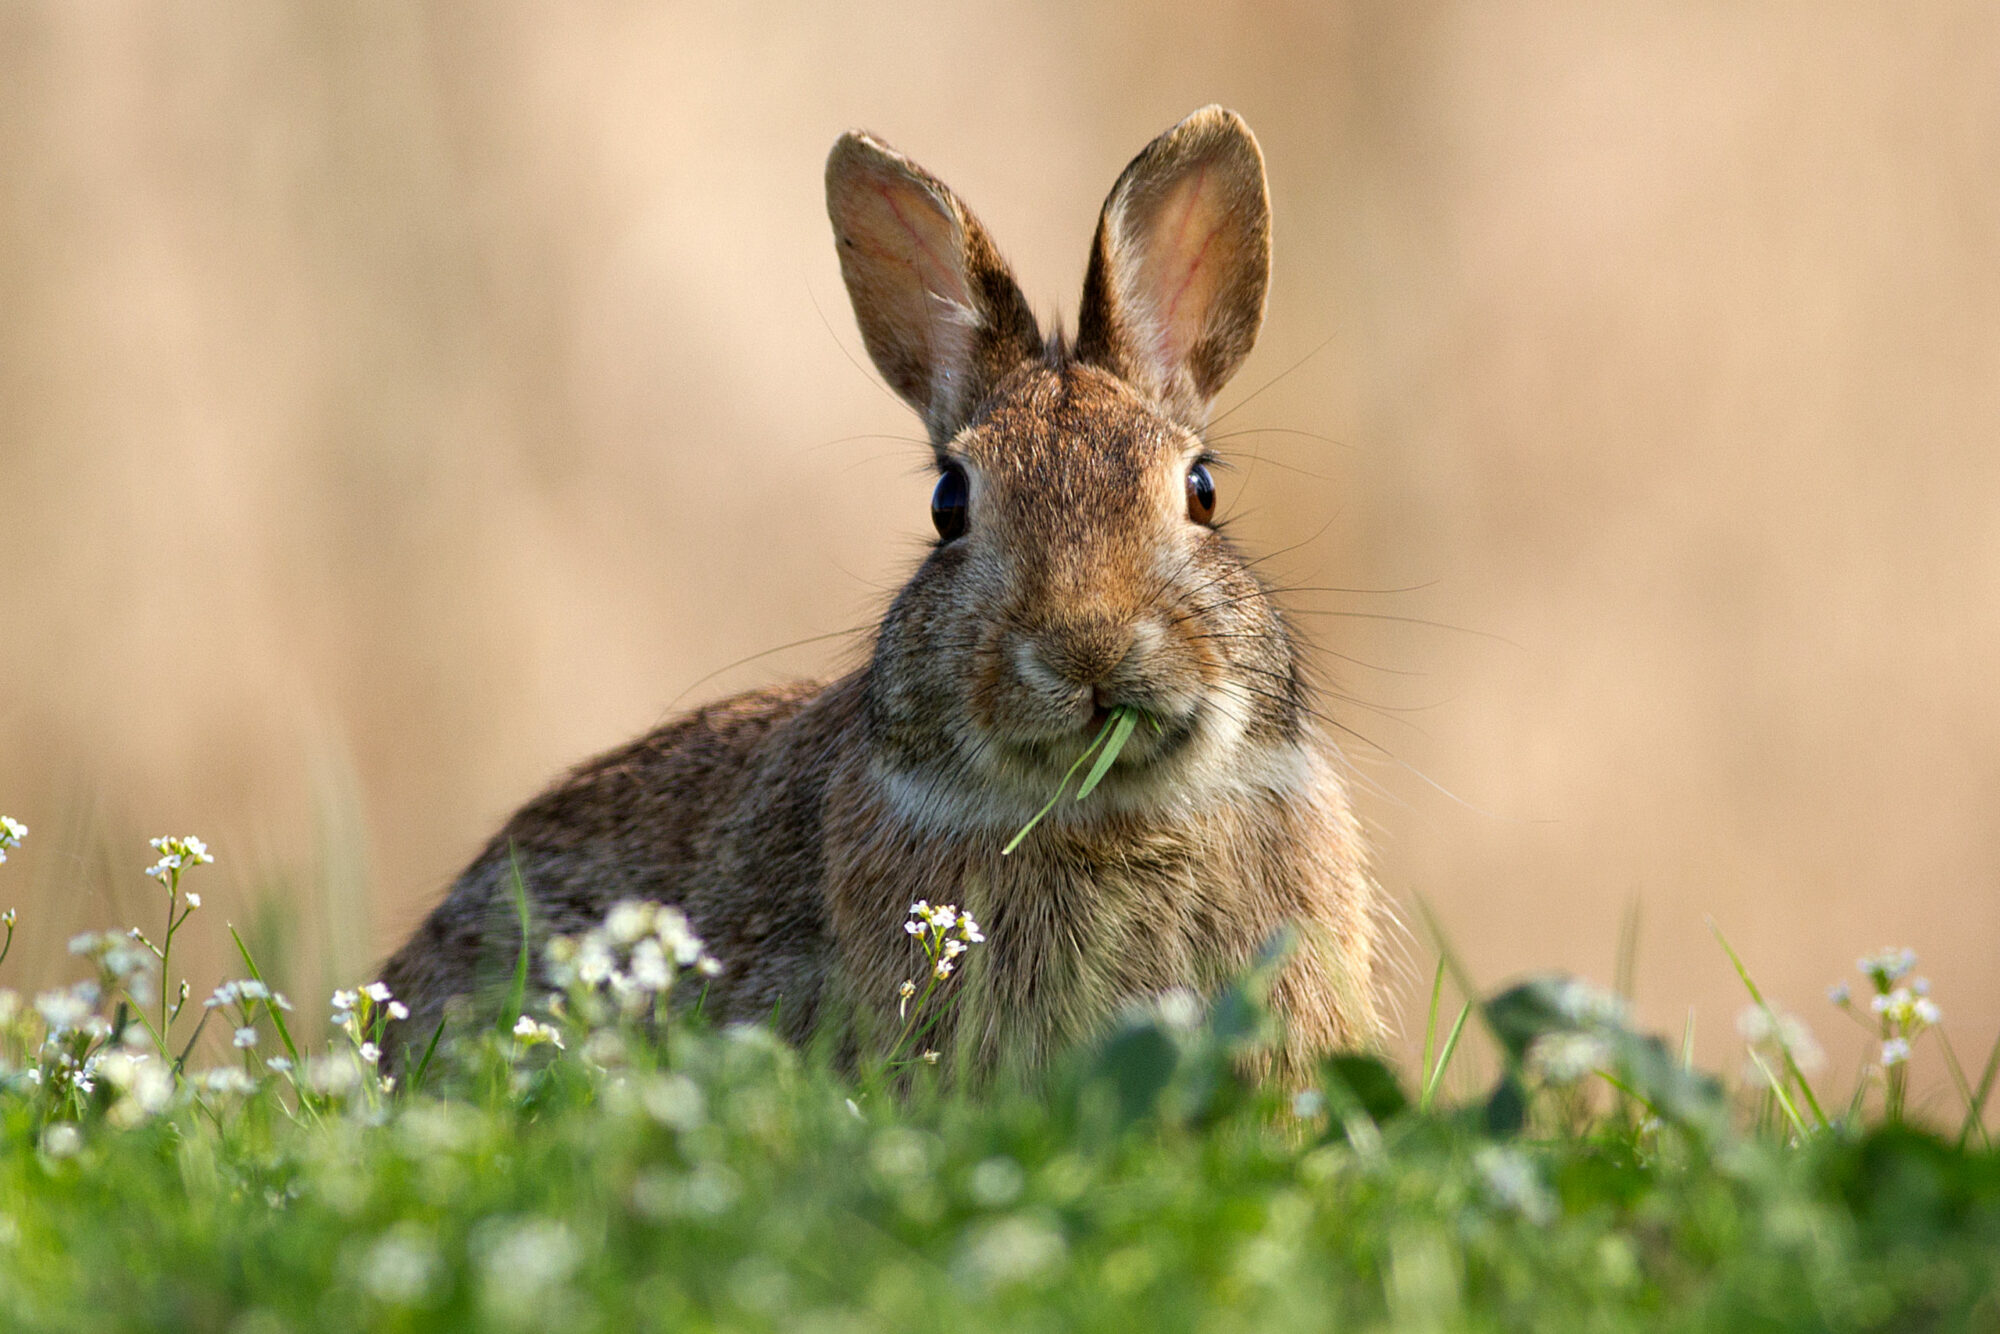 Wild,Rabbit,While,Eating,A,Blade,Of,Grass,,Blurred,Background,